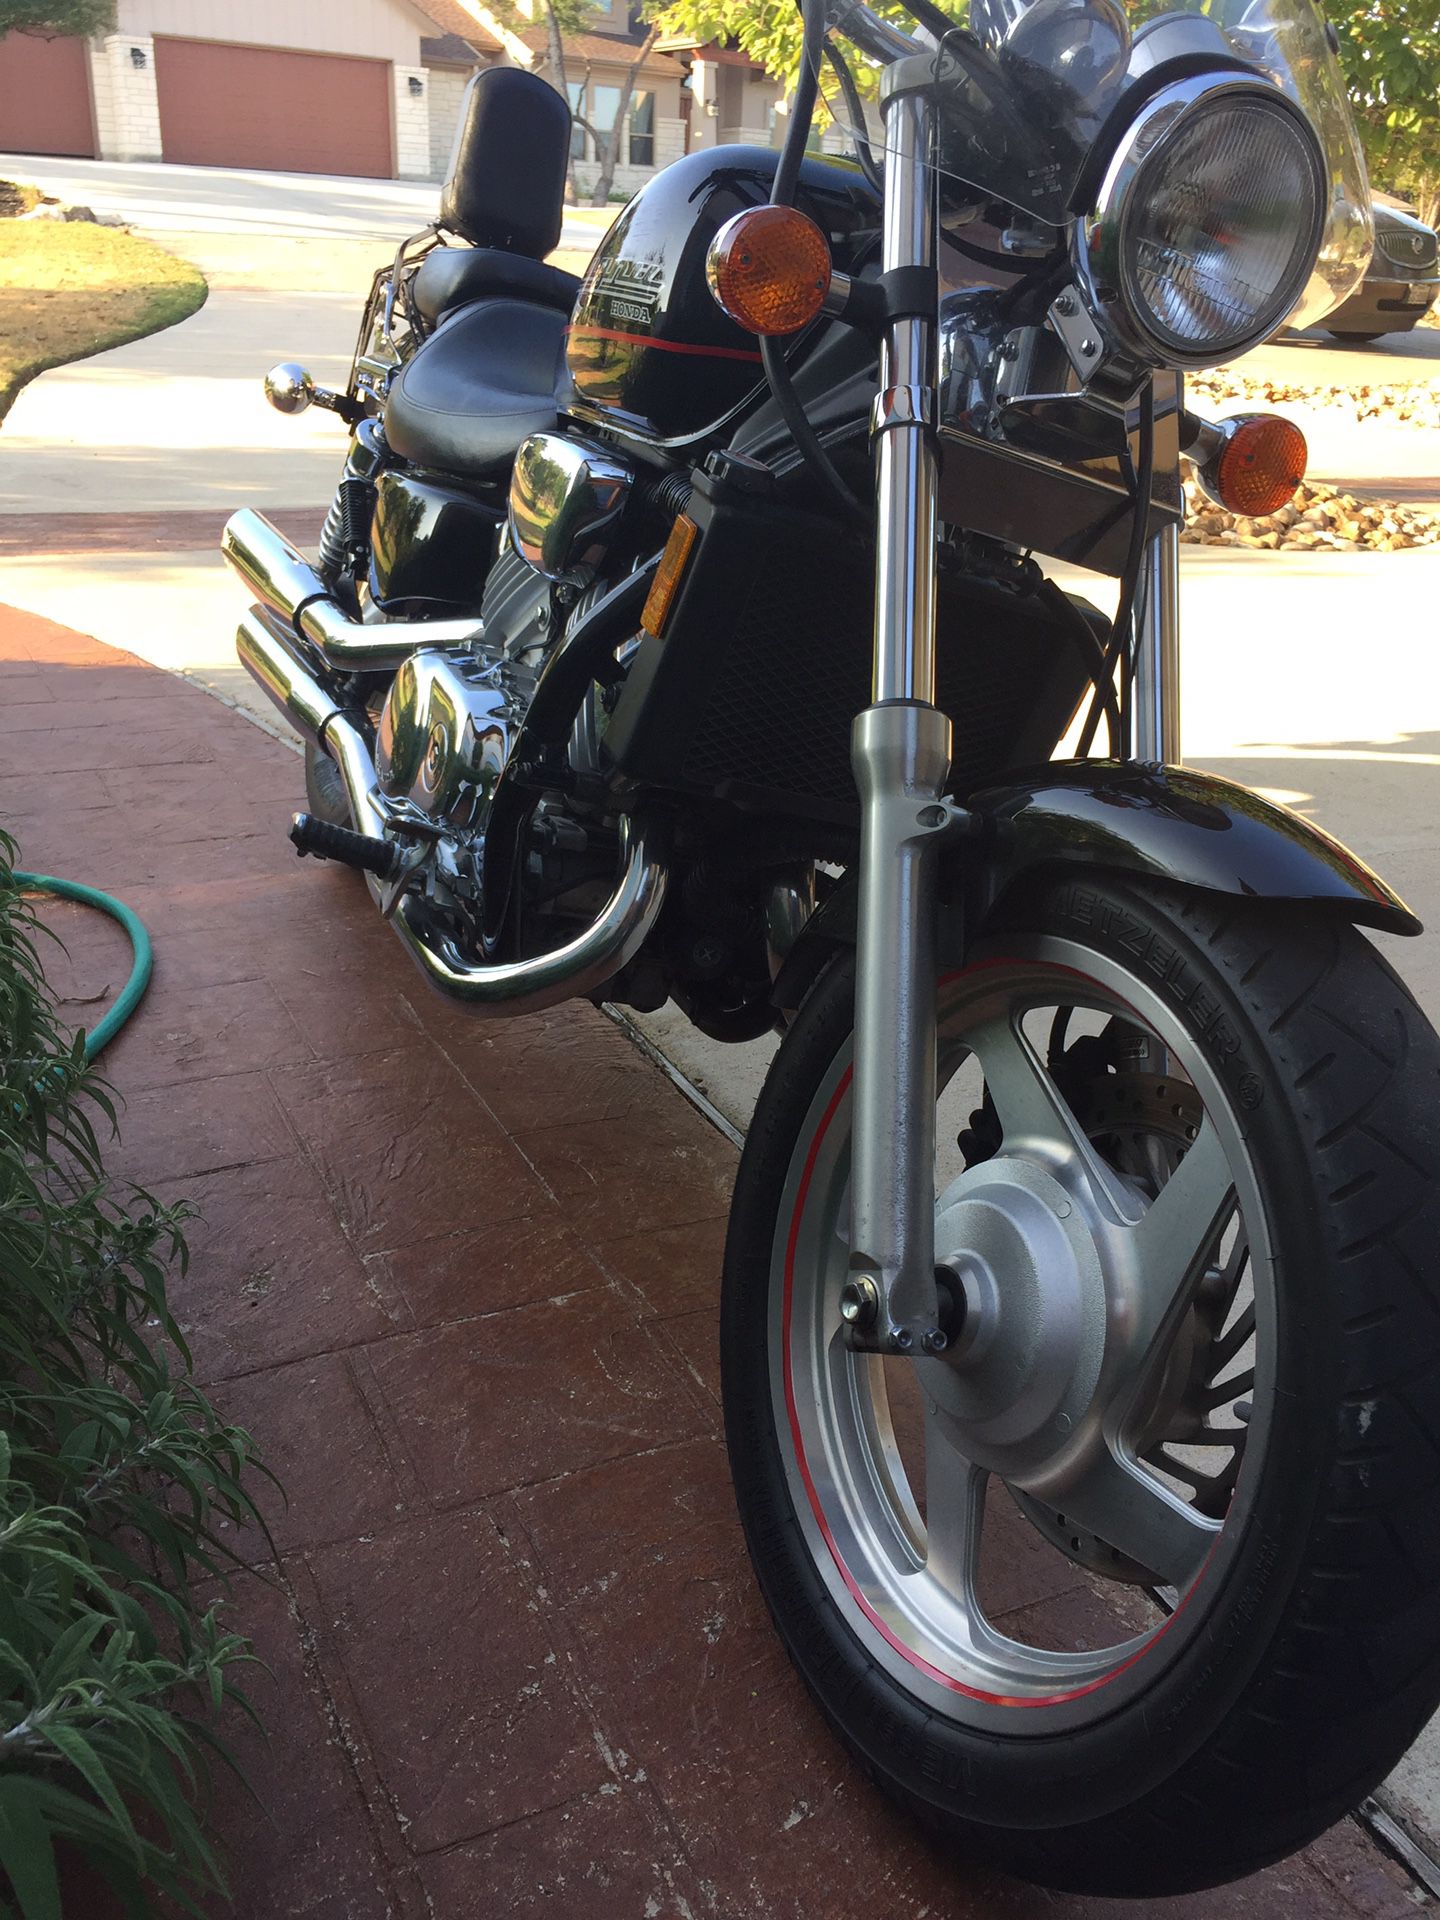 1999 Honda Magna VF750 Needs carburators cleaned Fat 180mm rear tire All systems work very well Approx 11,000 miles Gorgeous black and chrome motor